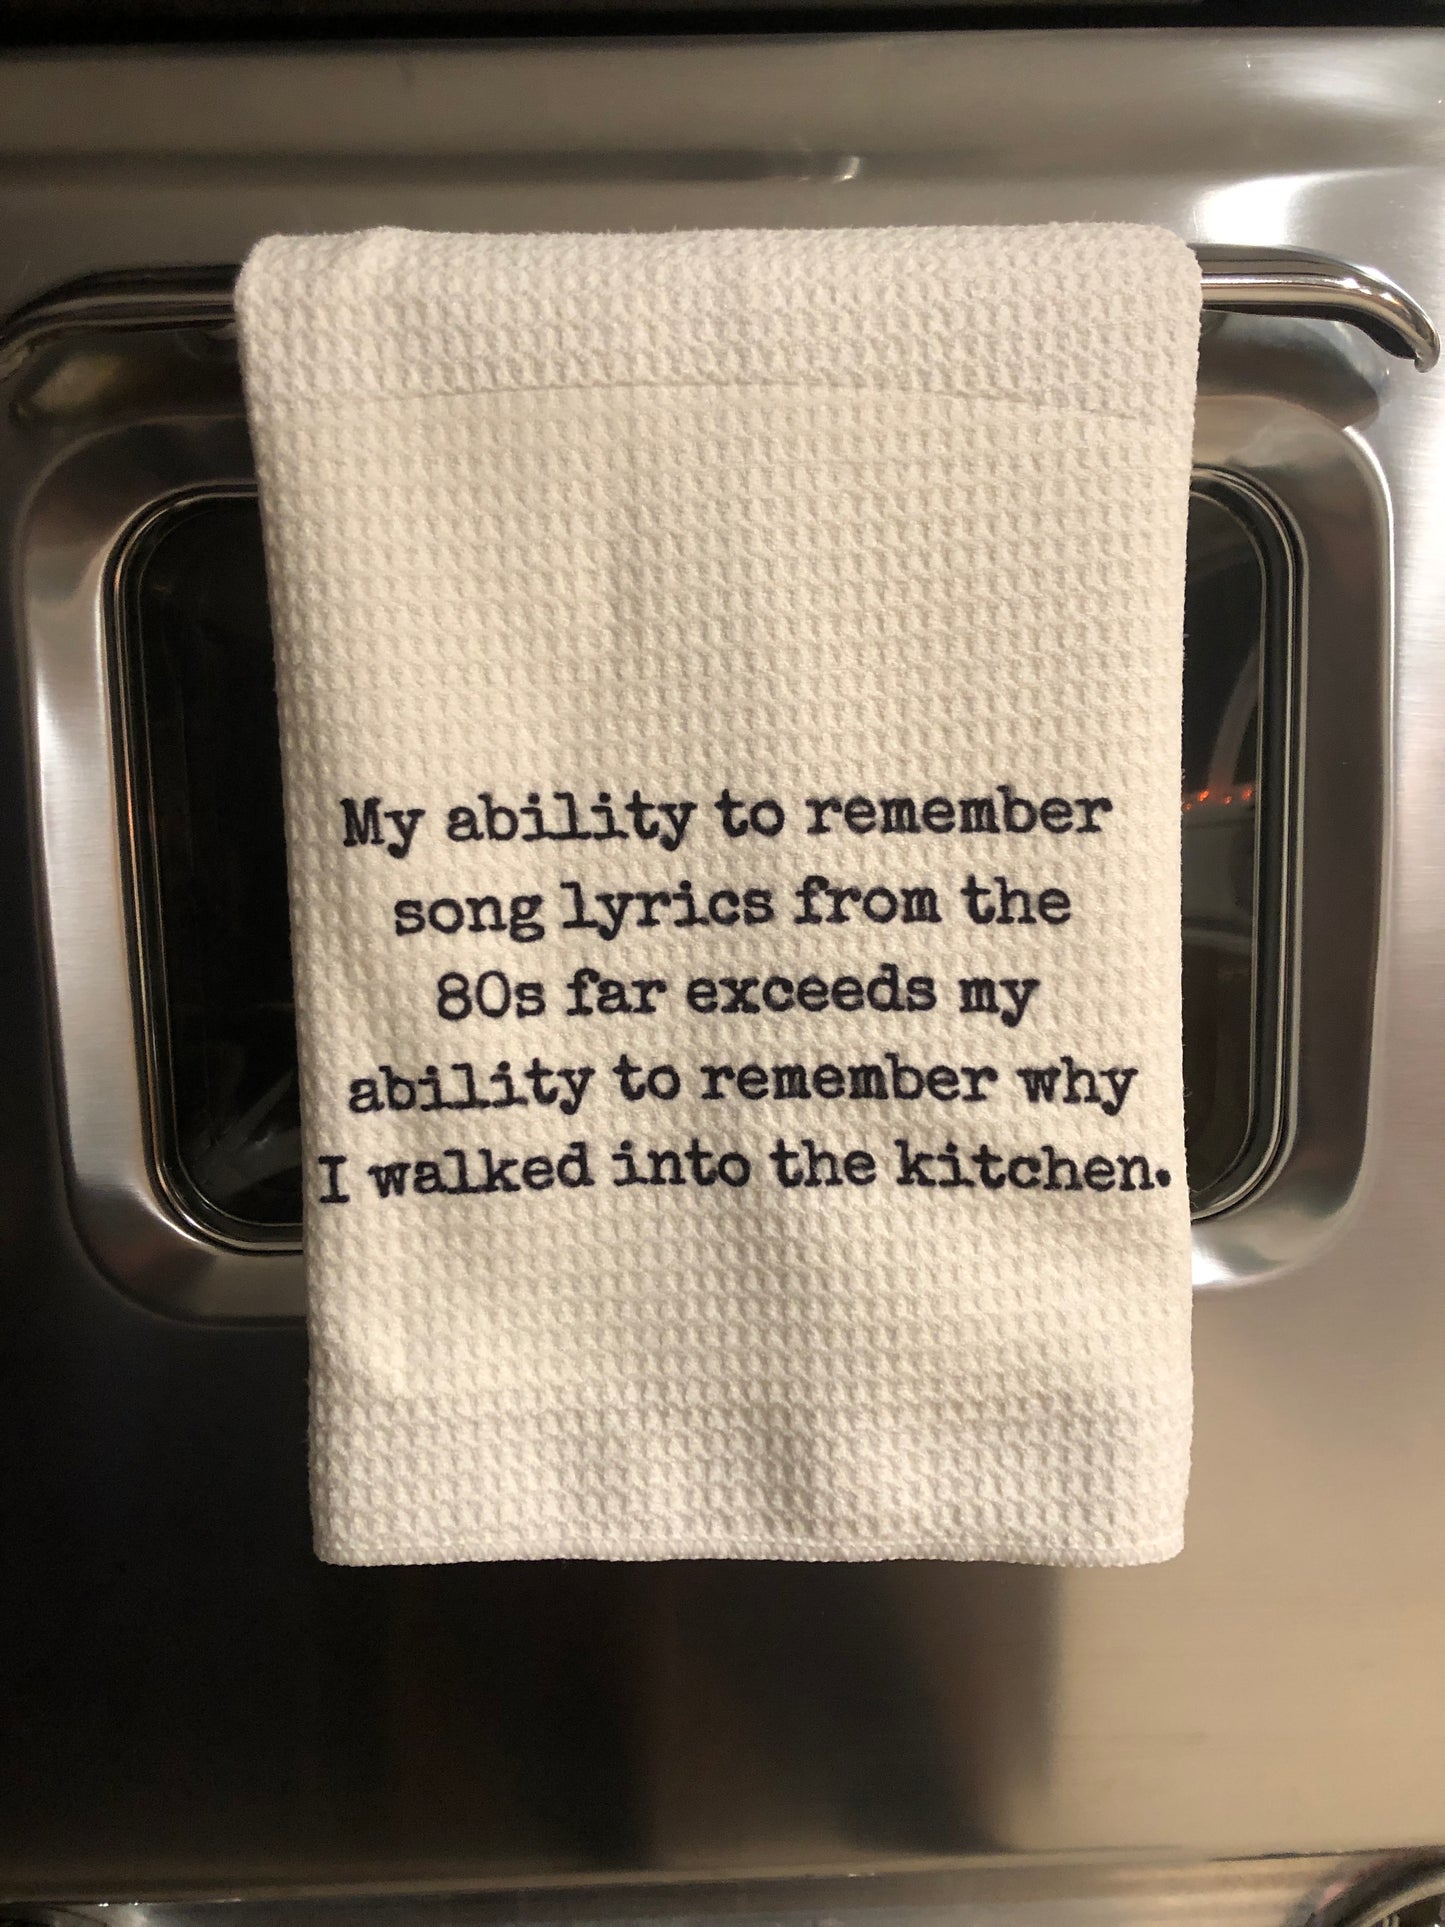 'My ability to remember song lyrics from the 80's far exceeds my ability to remember why I walked into the kitchen" waffle weave towel